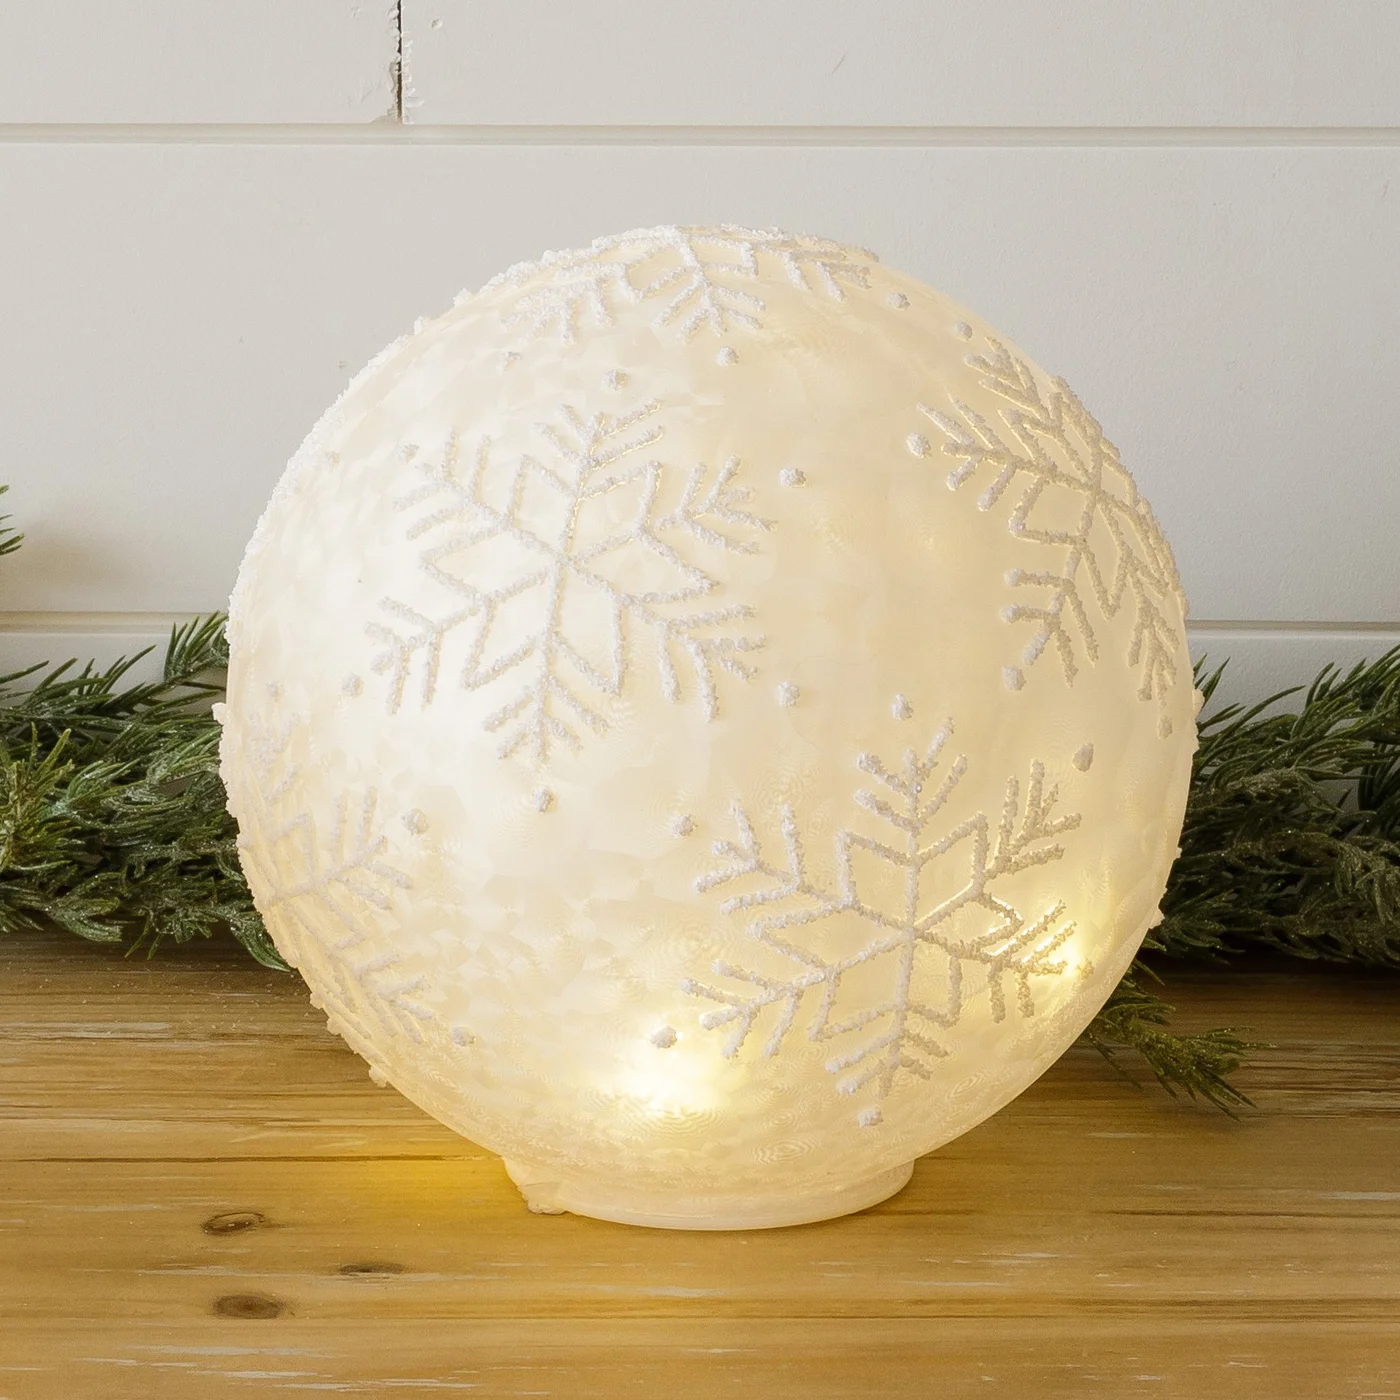 💙 Snowflakes 8" Lighted Glass Ball Decoration